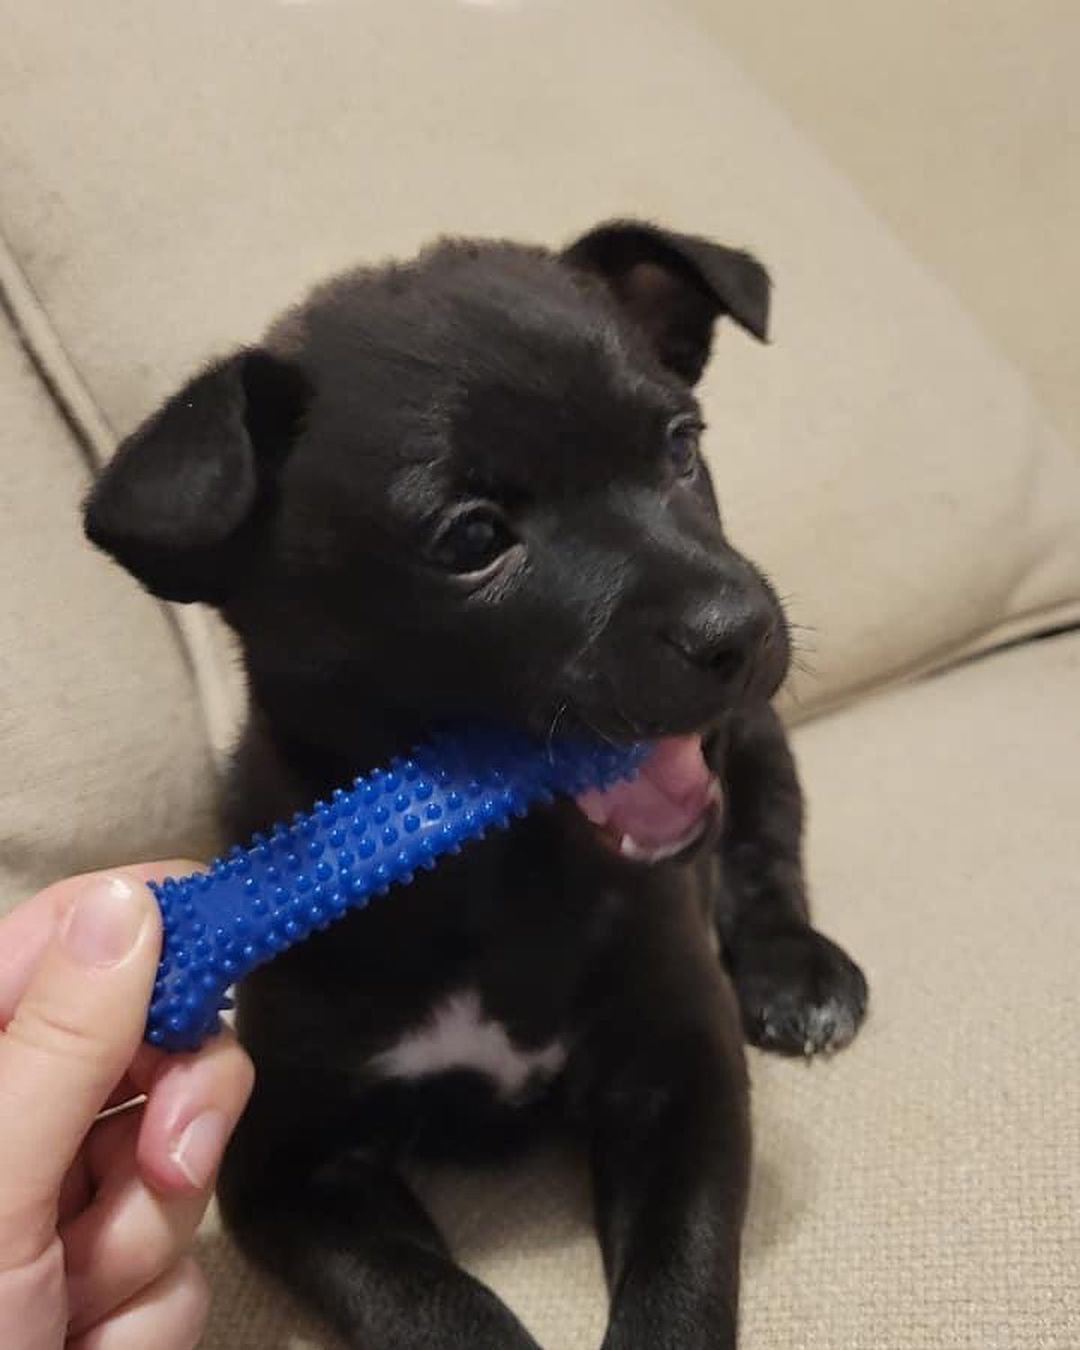 ⭐️ update: all puppies adopted ⭐️ Do I have a treat for you!? PUPPIES! 🐾 These teeny tiny puppies are 8 week old chihuahua mixes. There are 8 - 4 males and 4 females! Puppies are a project and will need lots of time, love, and care!
.
Due to their age we will only be adopting locally in the Charlotte area. Not all of them have made it to our website but all 8 are available for adoption. If you’re interested head to our website and fill out an application - reference the Chihuahua litter. ✨